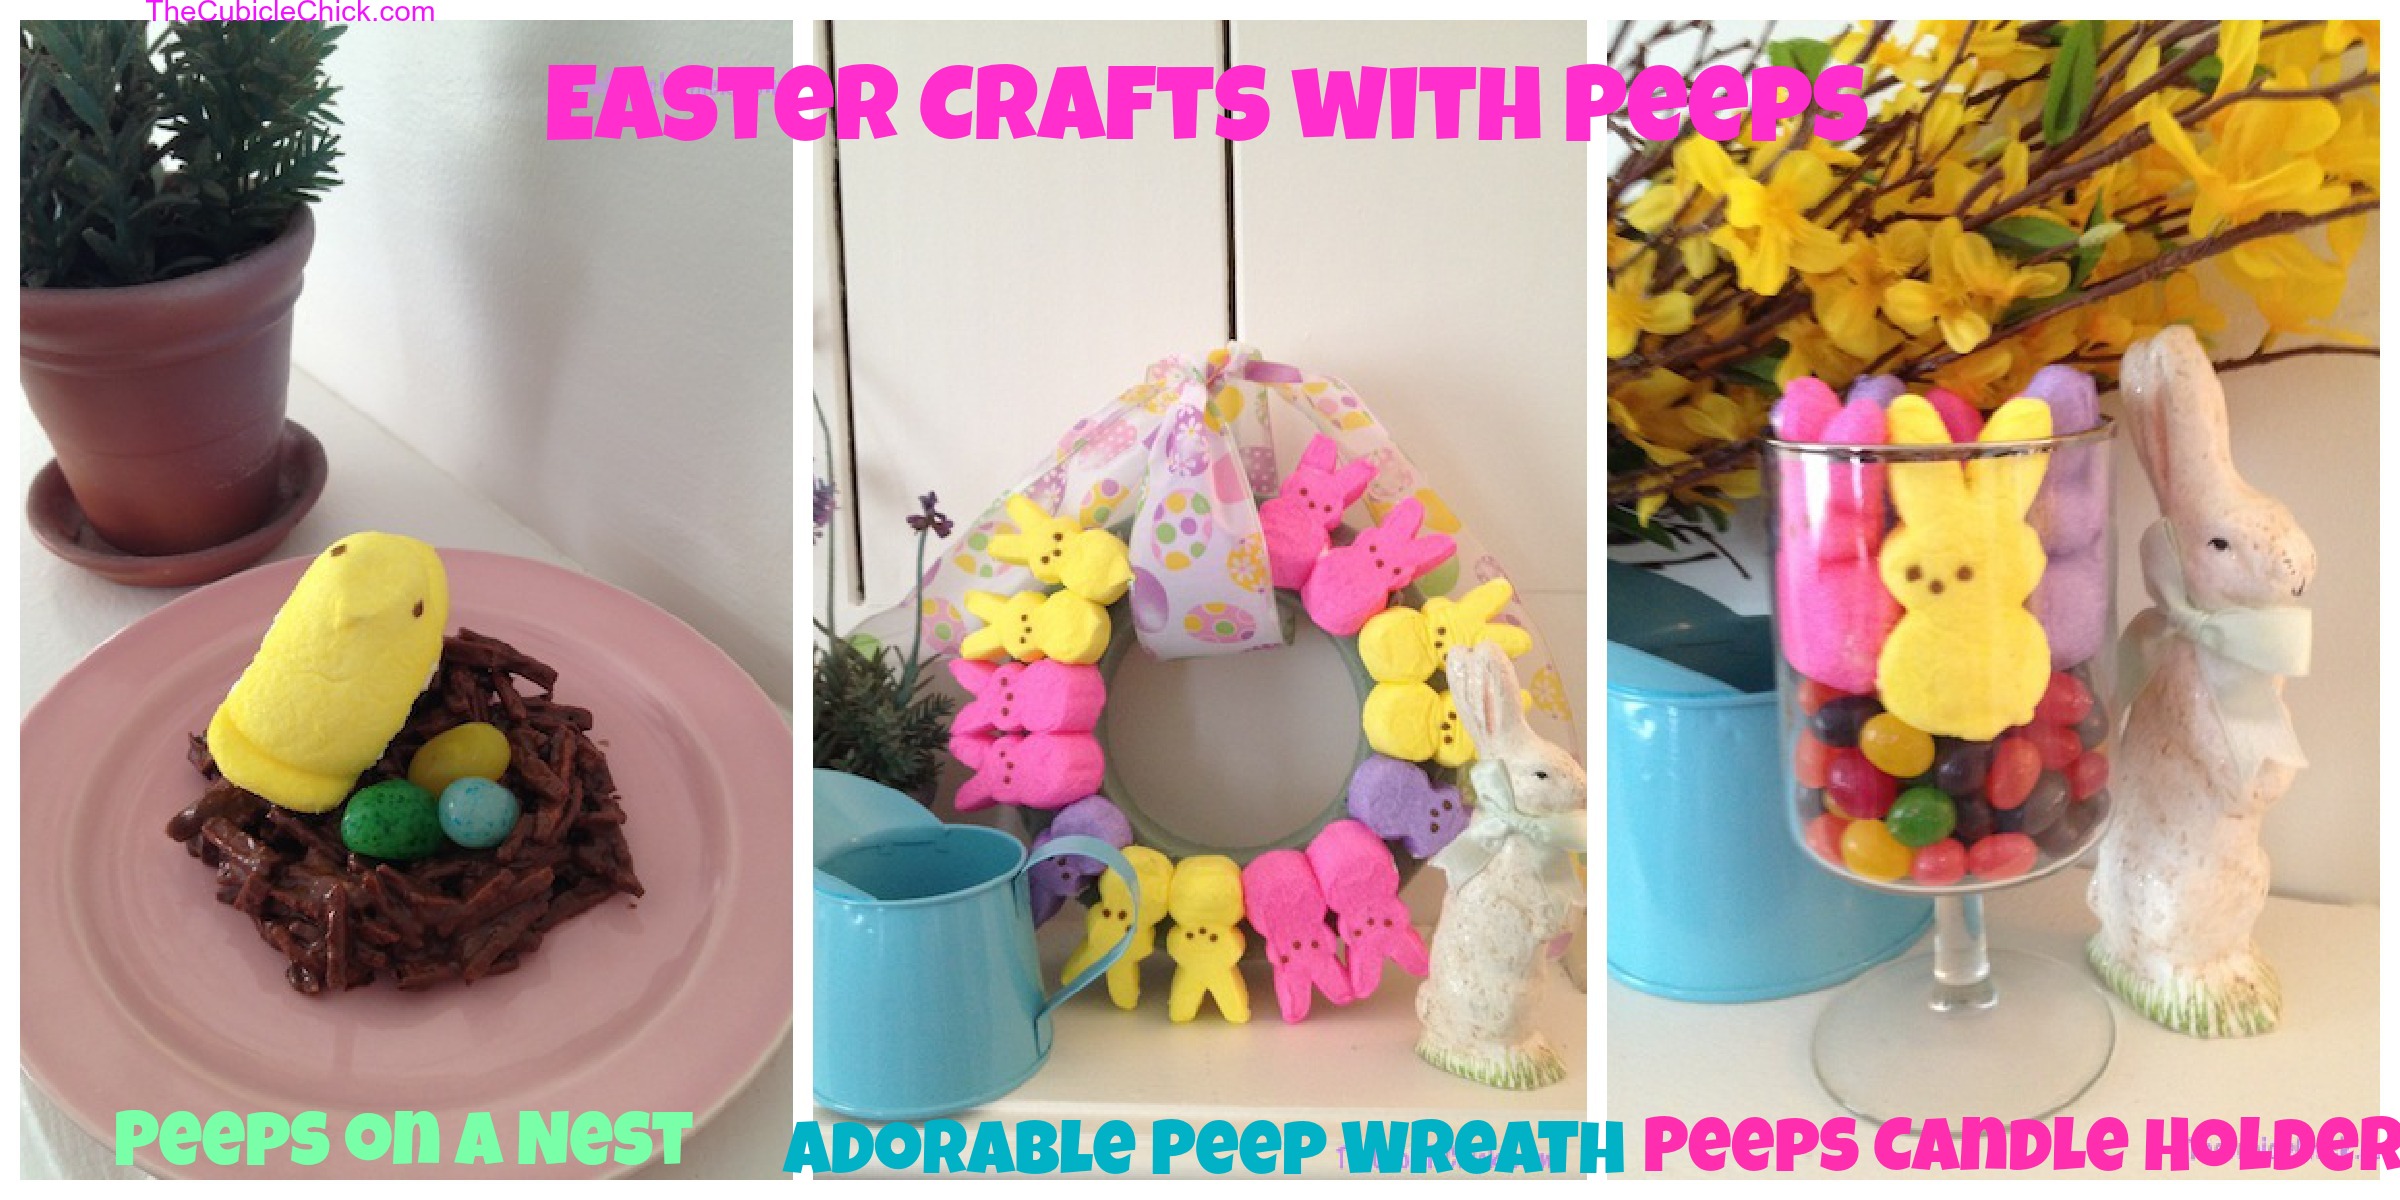 Easter Peep Homemade Jelly Soap Recipe - Everything Pretty